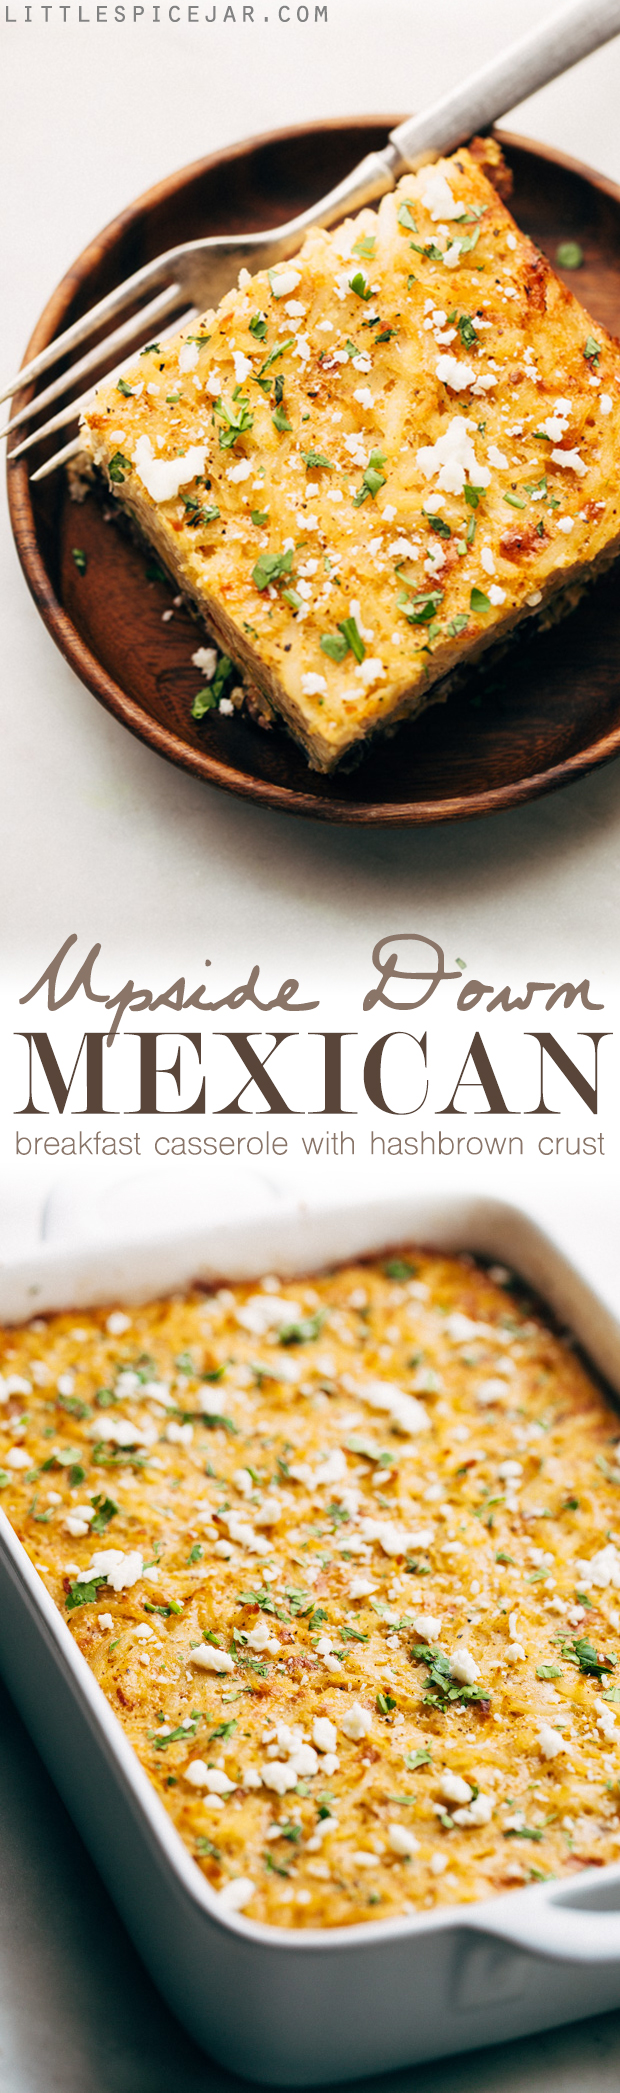 Mexican Breakfast Casserole with Hash Brown Crust - an easy casserole that feeds a crowd! You can even stuff it inside warm tortillas and make breakfast tacos! #breakfastcasserole #mexicanbreakfastcasserole #breakfasttacos | Littlespicejar.com